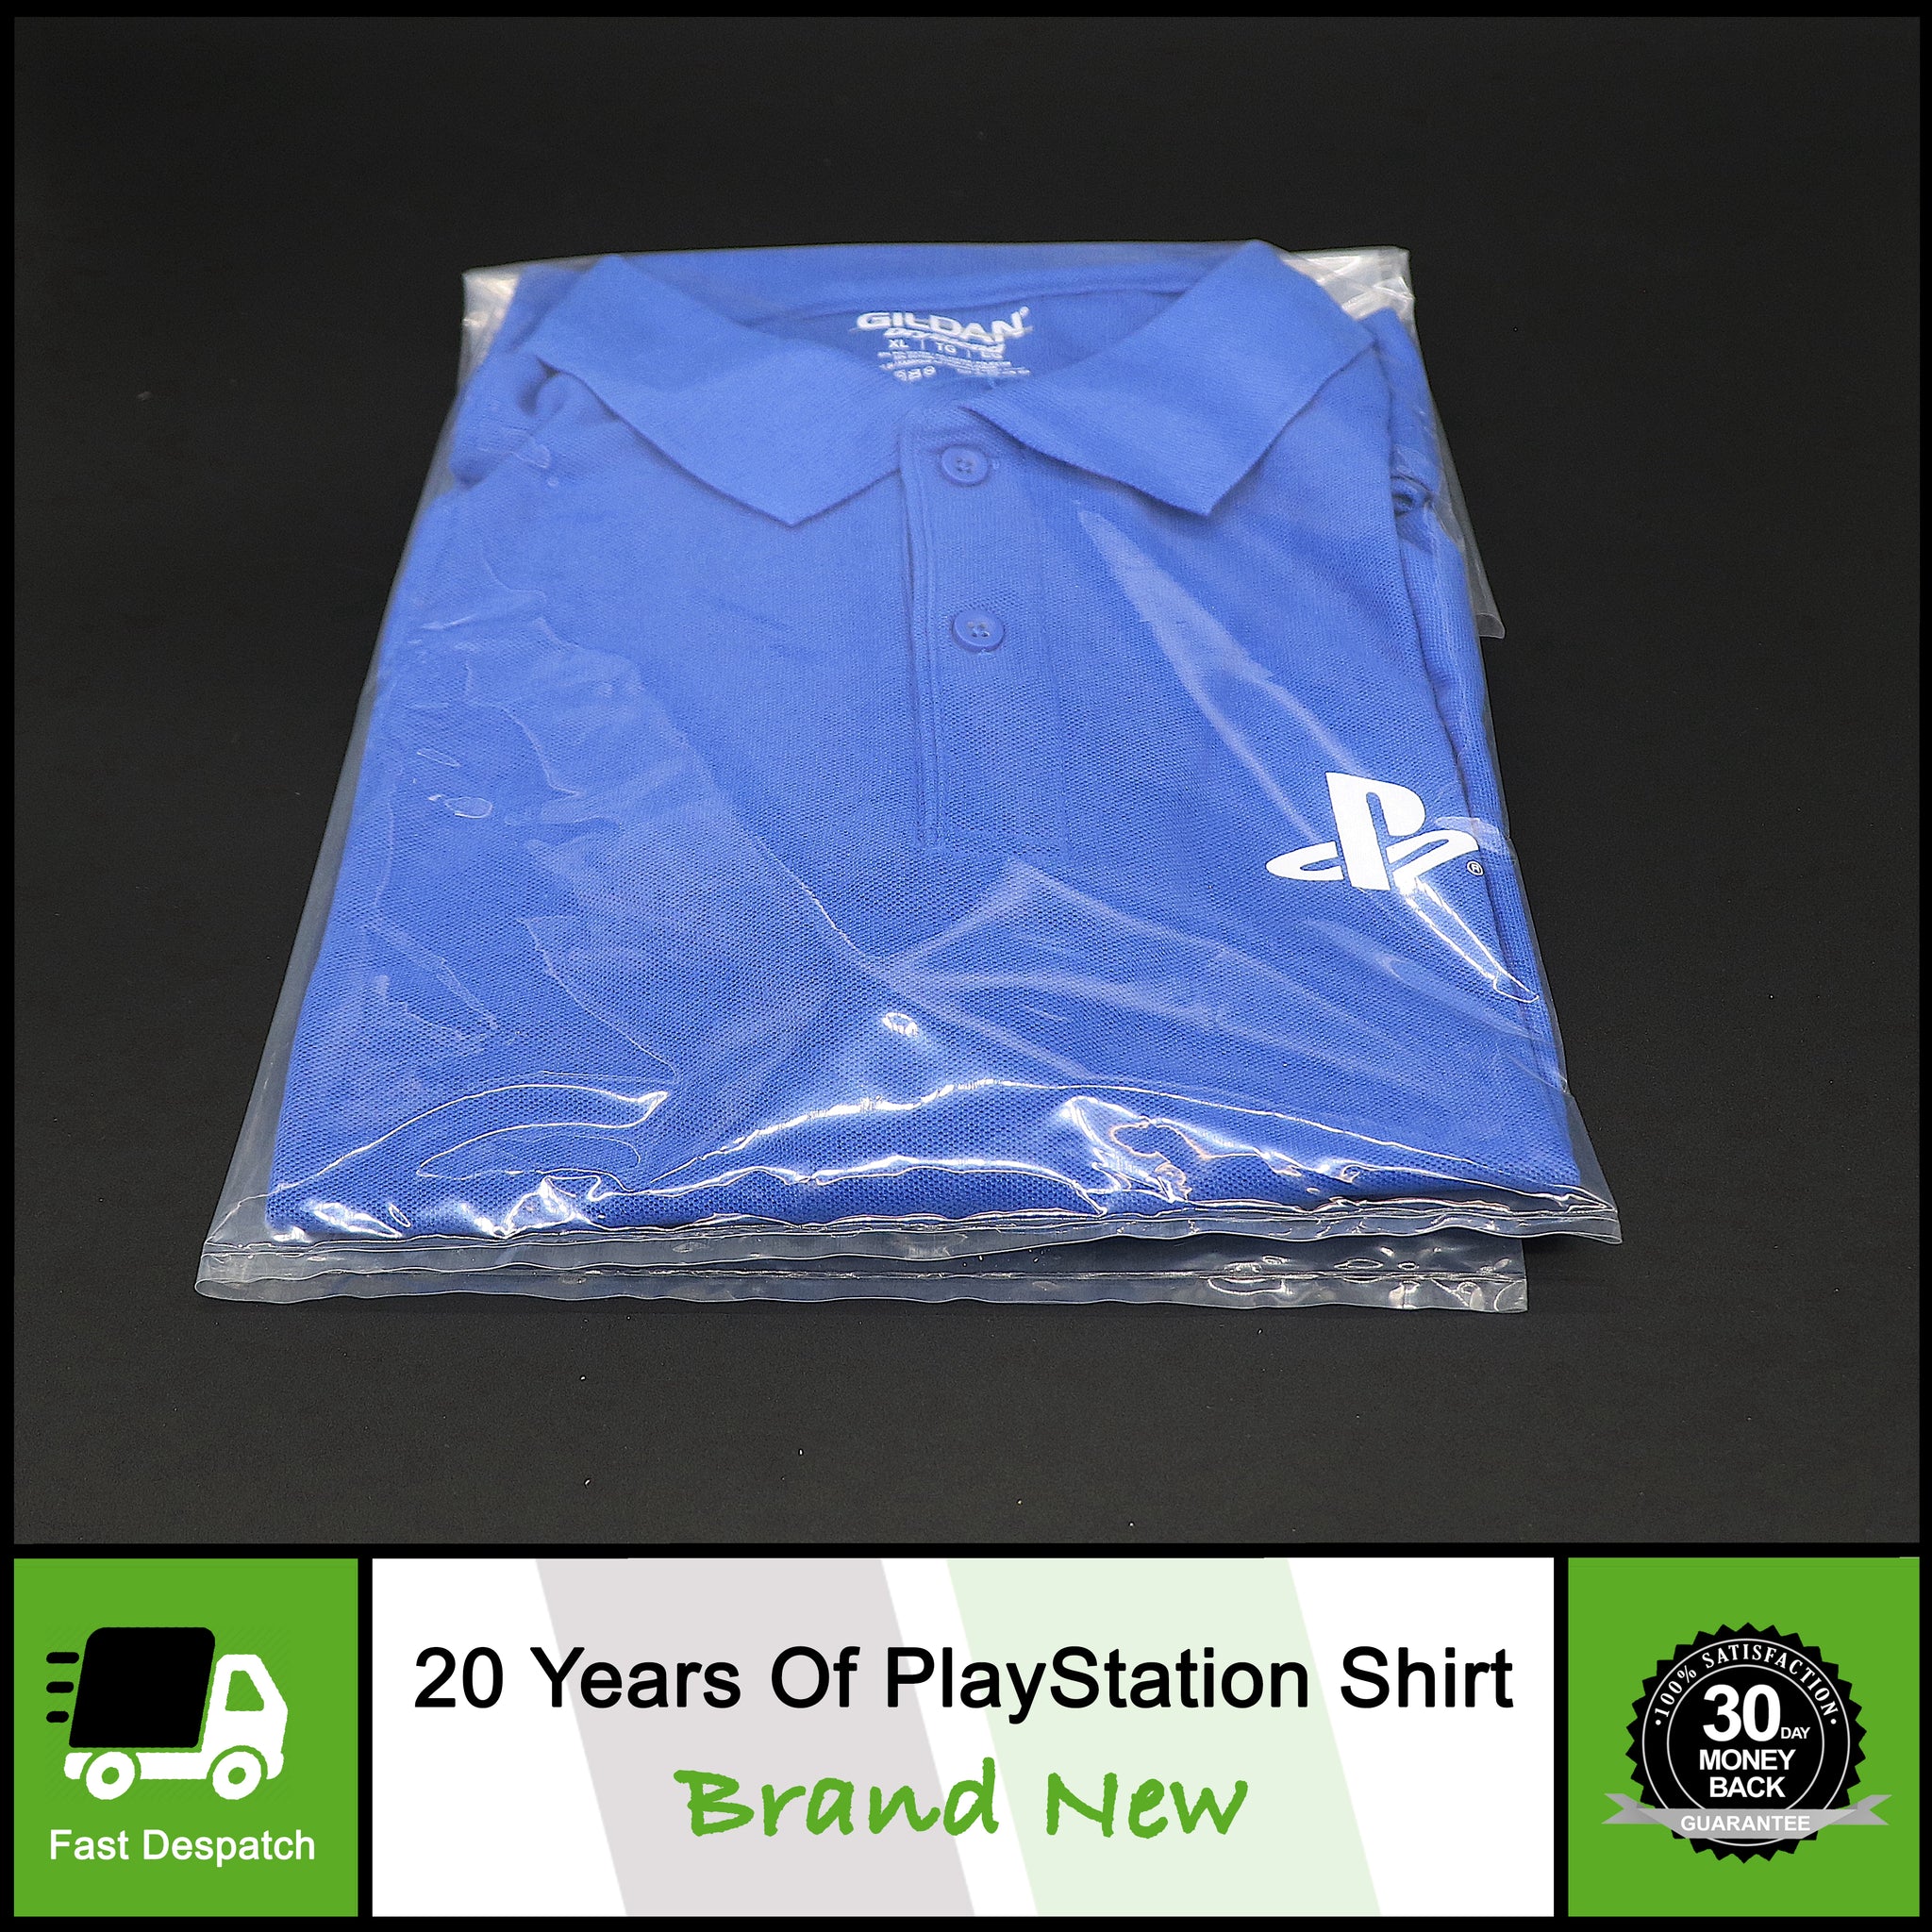 UEFA Champions League 20 Years of Playstation Promo Polo Shirt Top Blue XL